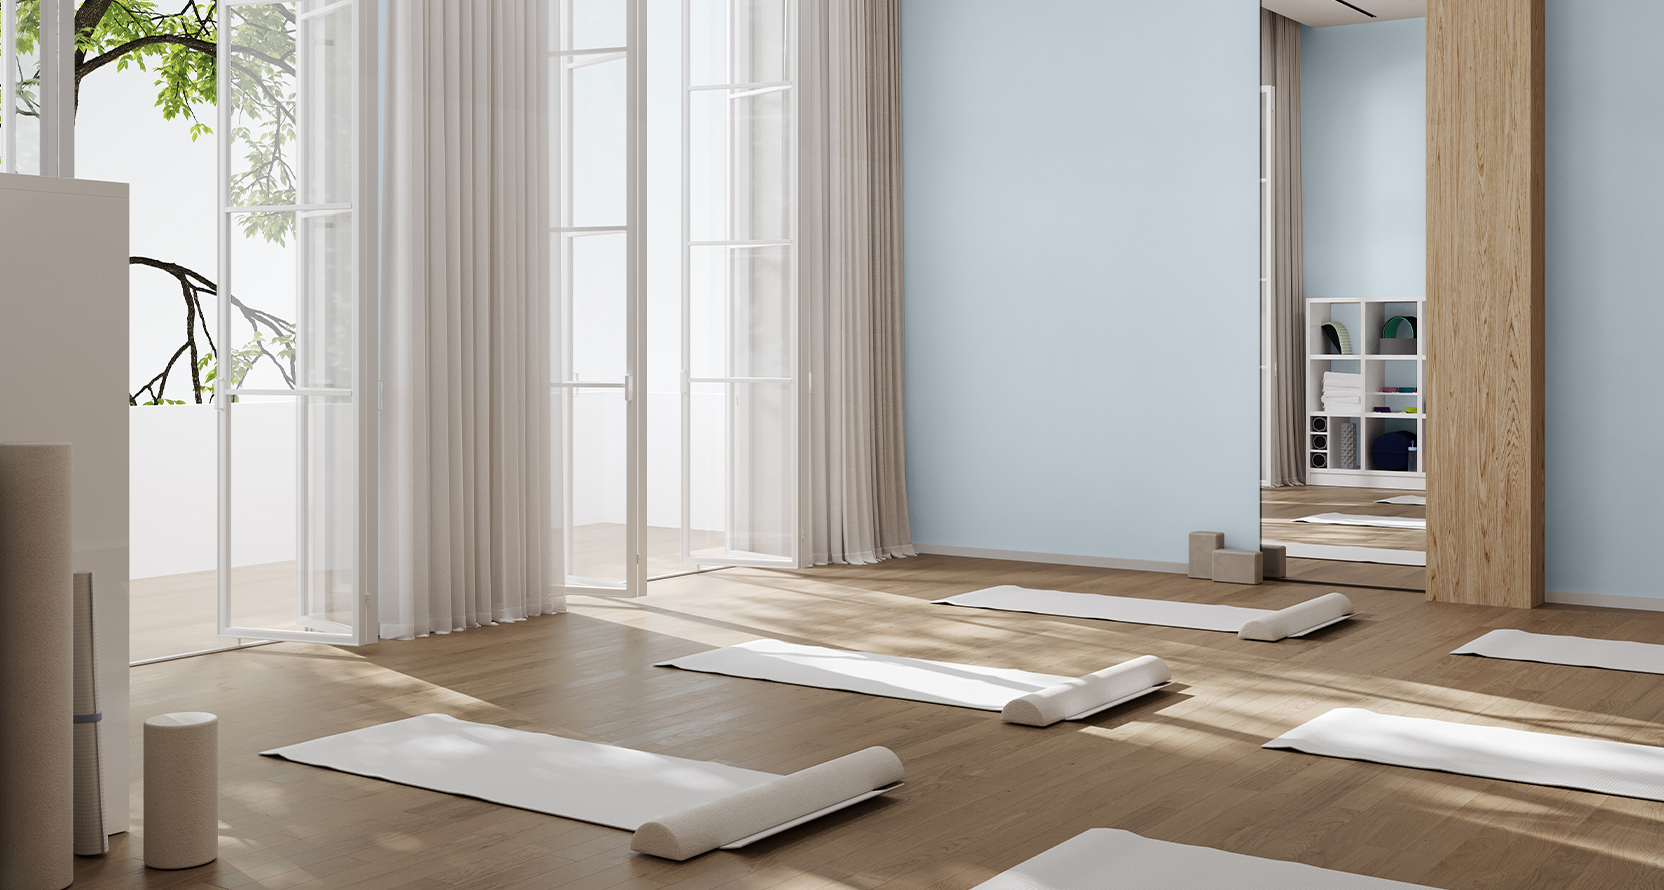 Yoga or meditation space with floor-to-ceiling open windows, Upward painted walls, and meditation mats and bolsters arranged on the natural wood floors.